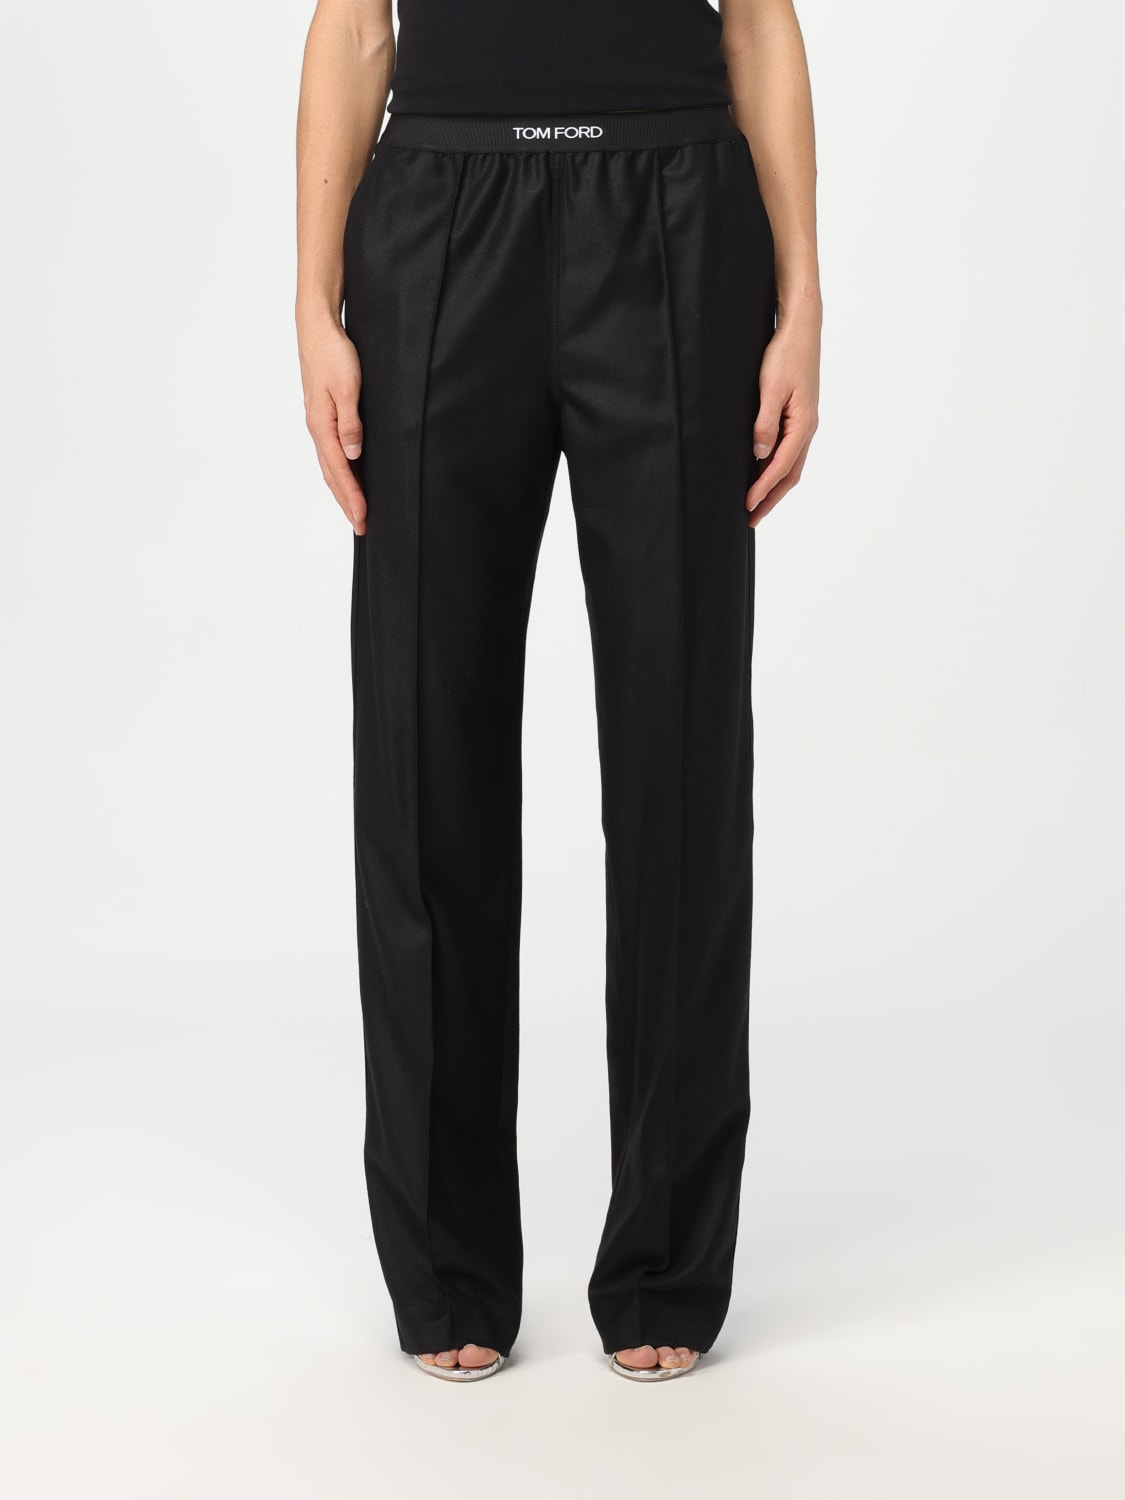 TOM FORD Women Trousers - Vestiaire Collective